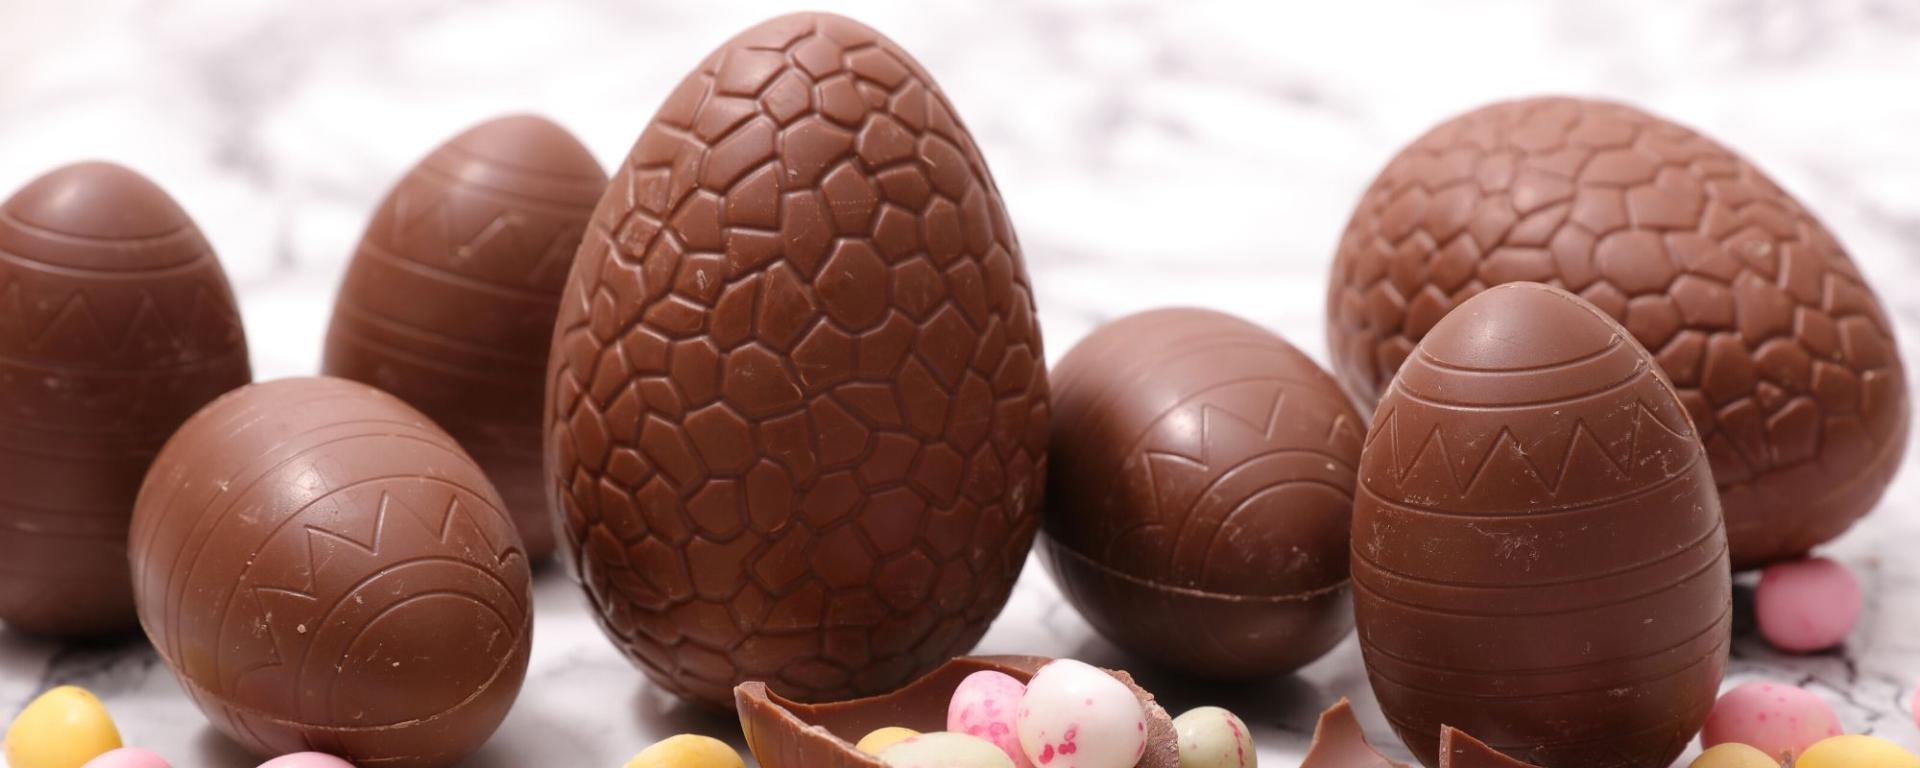 Chocolate Easter Egg Feature Image